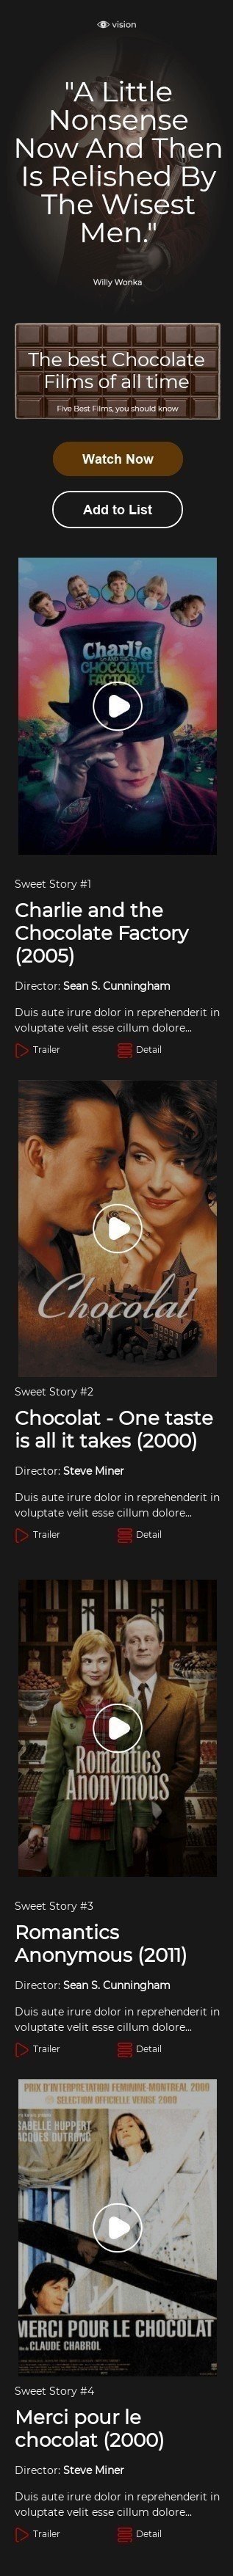 International Chocolate Day Email Template «Five Sweet Stories» for Movies industry mobile view